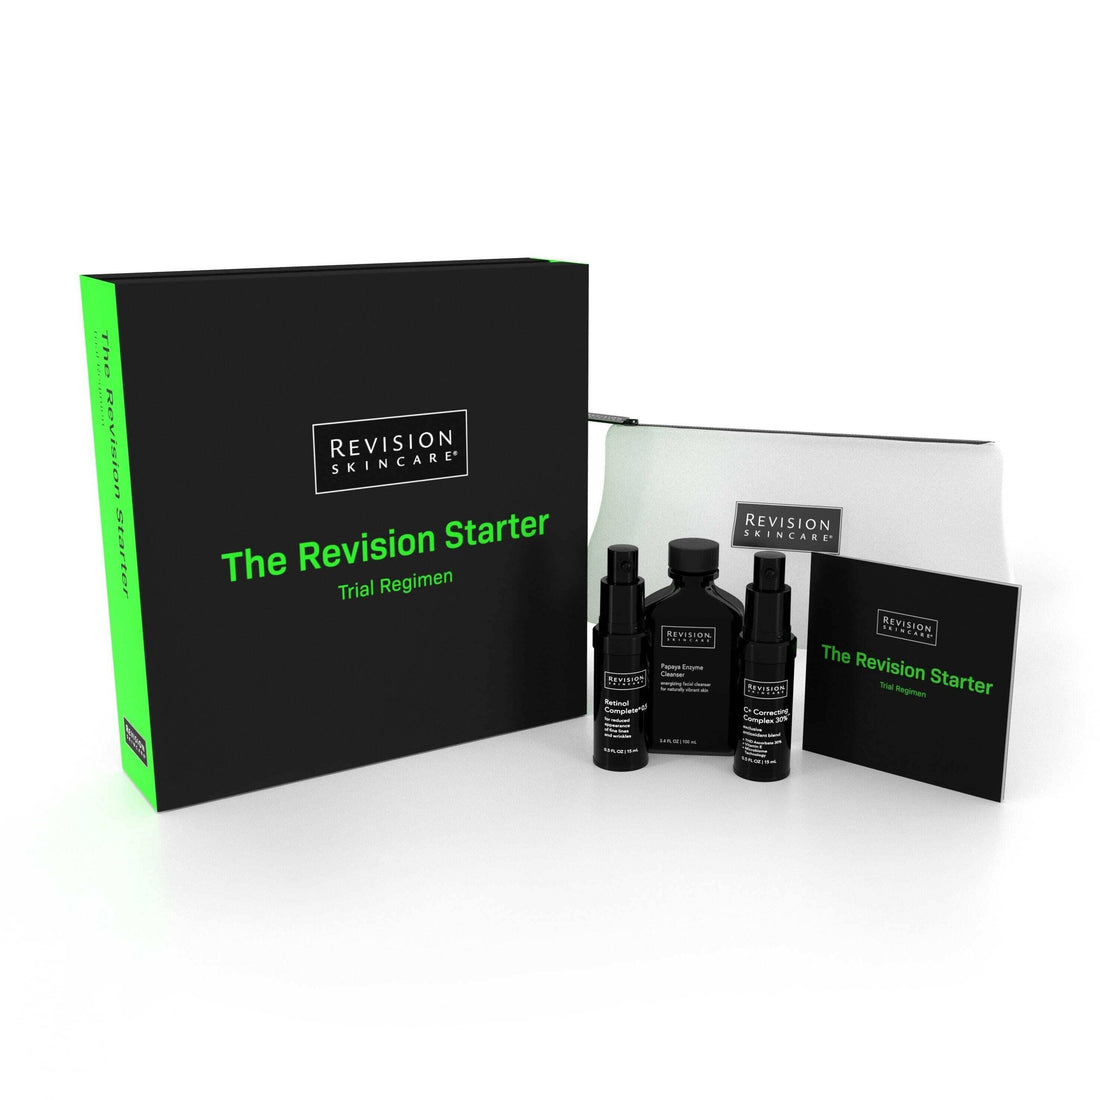 Revision Skincare The Revision Starter Limited Edition Trial Regimen Revision Shop at Skin Type Solutions